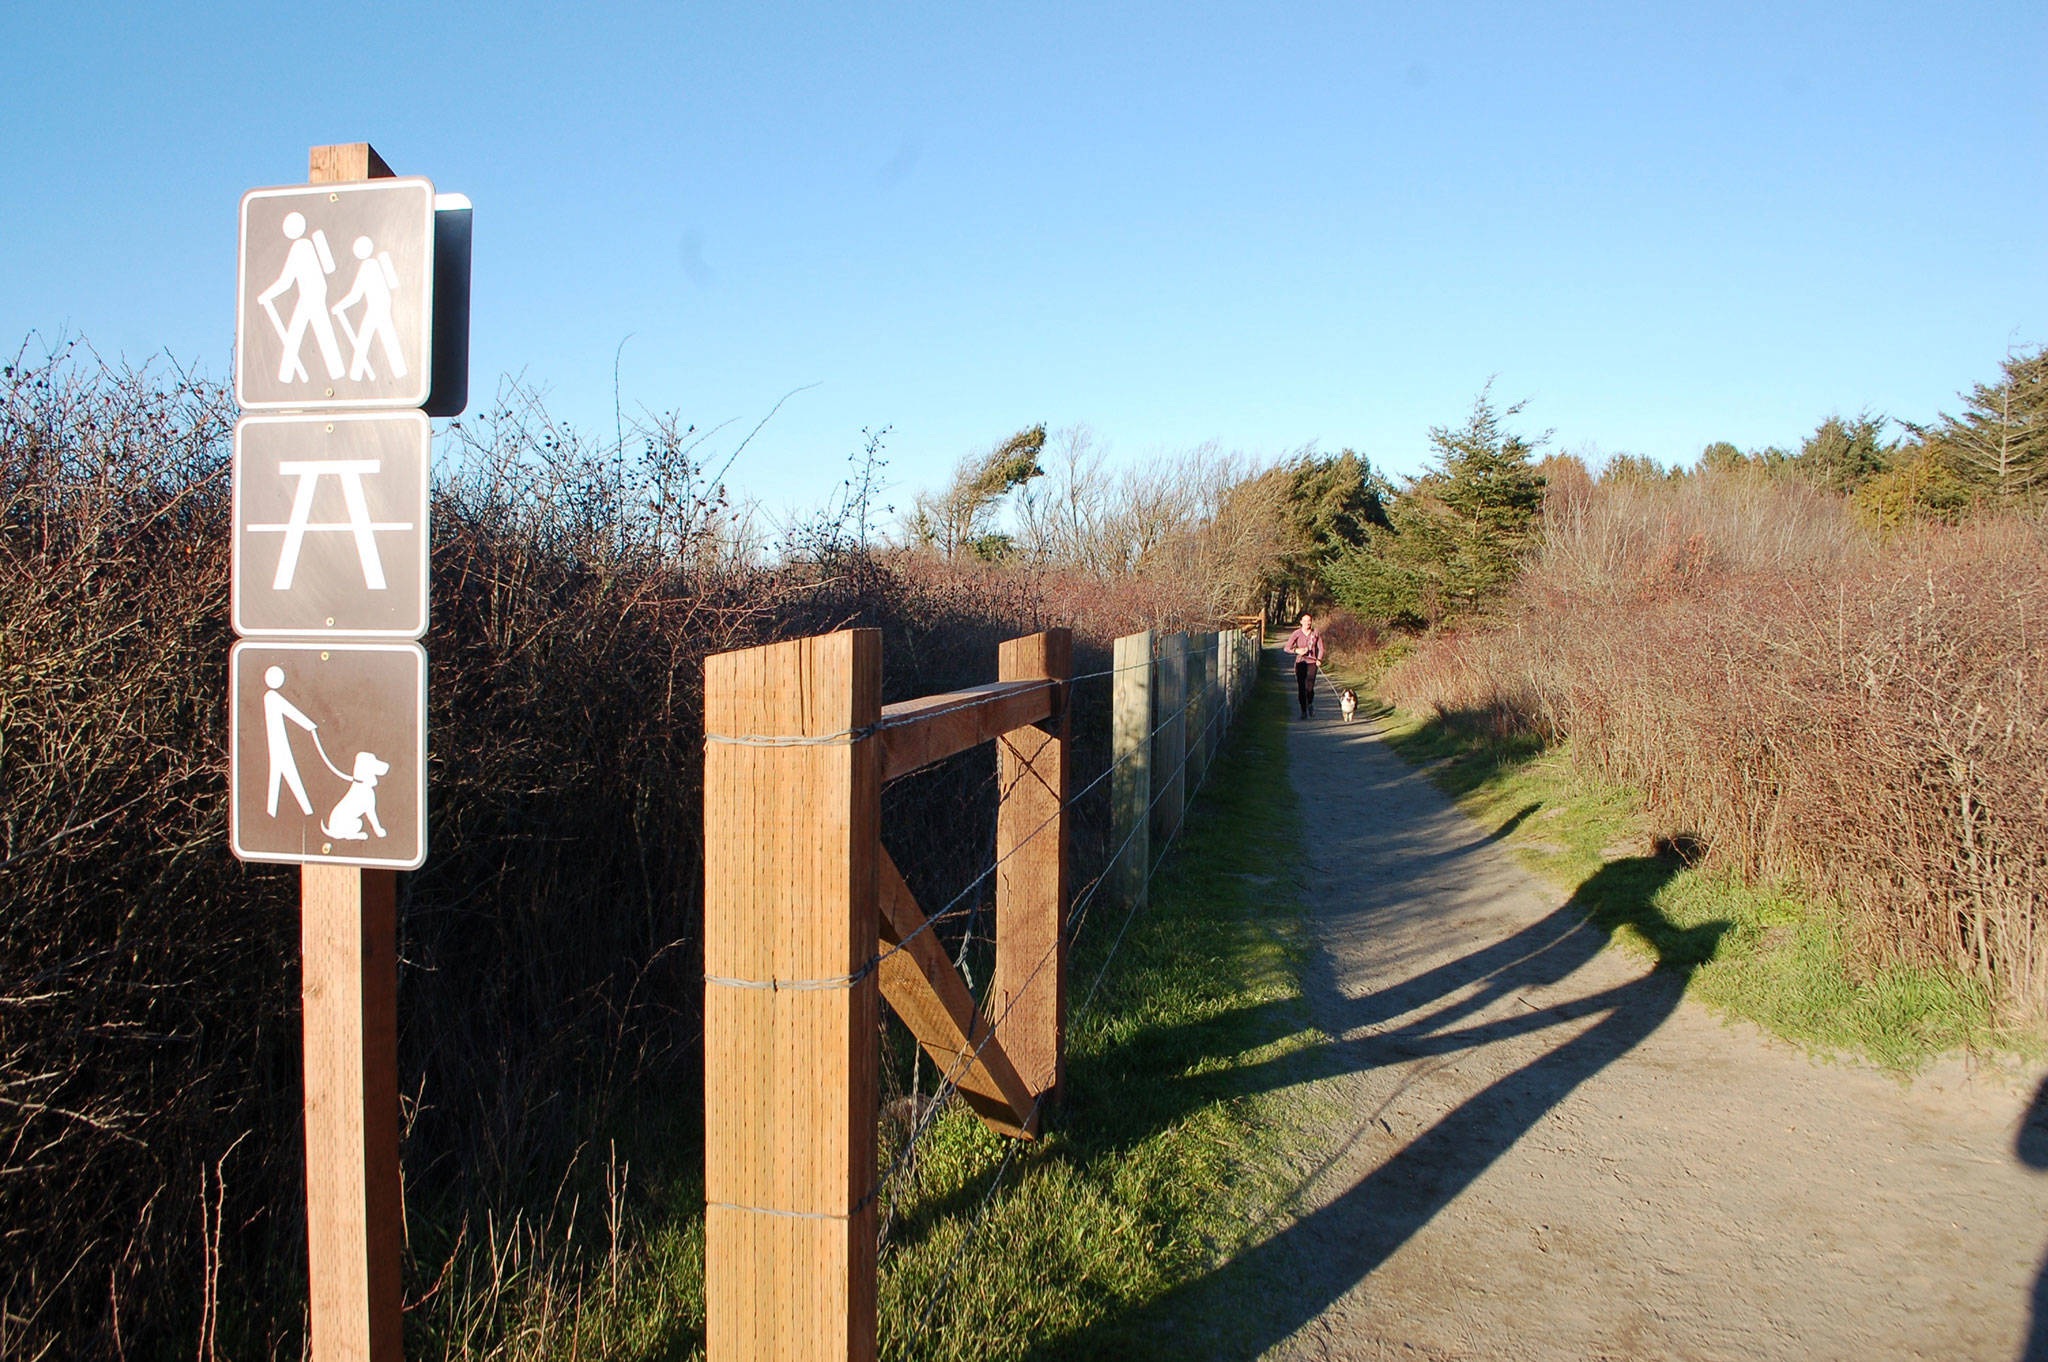 One of the proposed changes to the Dungeness Recreation Area Master Plan includes realigning the bluff trails closer to the campgrounds due to continued erosion along the bluffs, according to the Clallam Count Parks Department. Sequim Gazette photo by Erin Hawkins